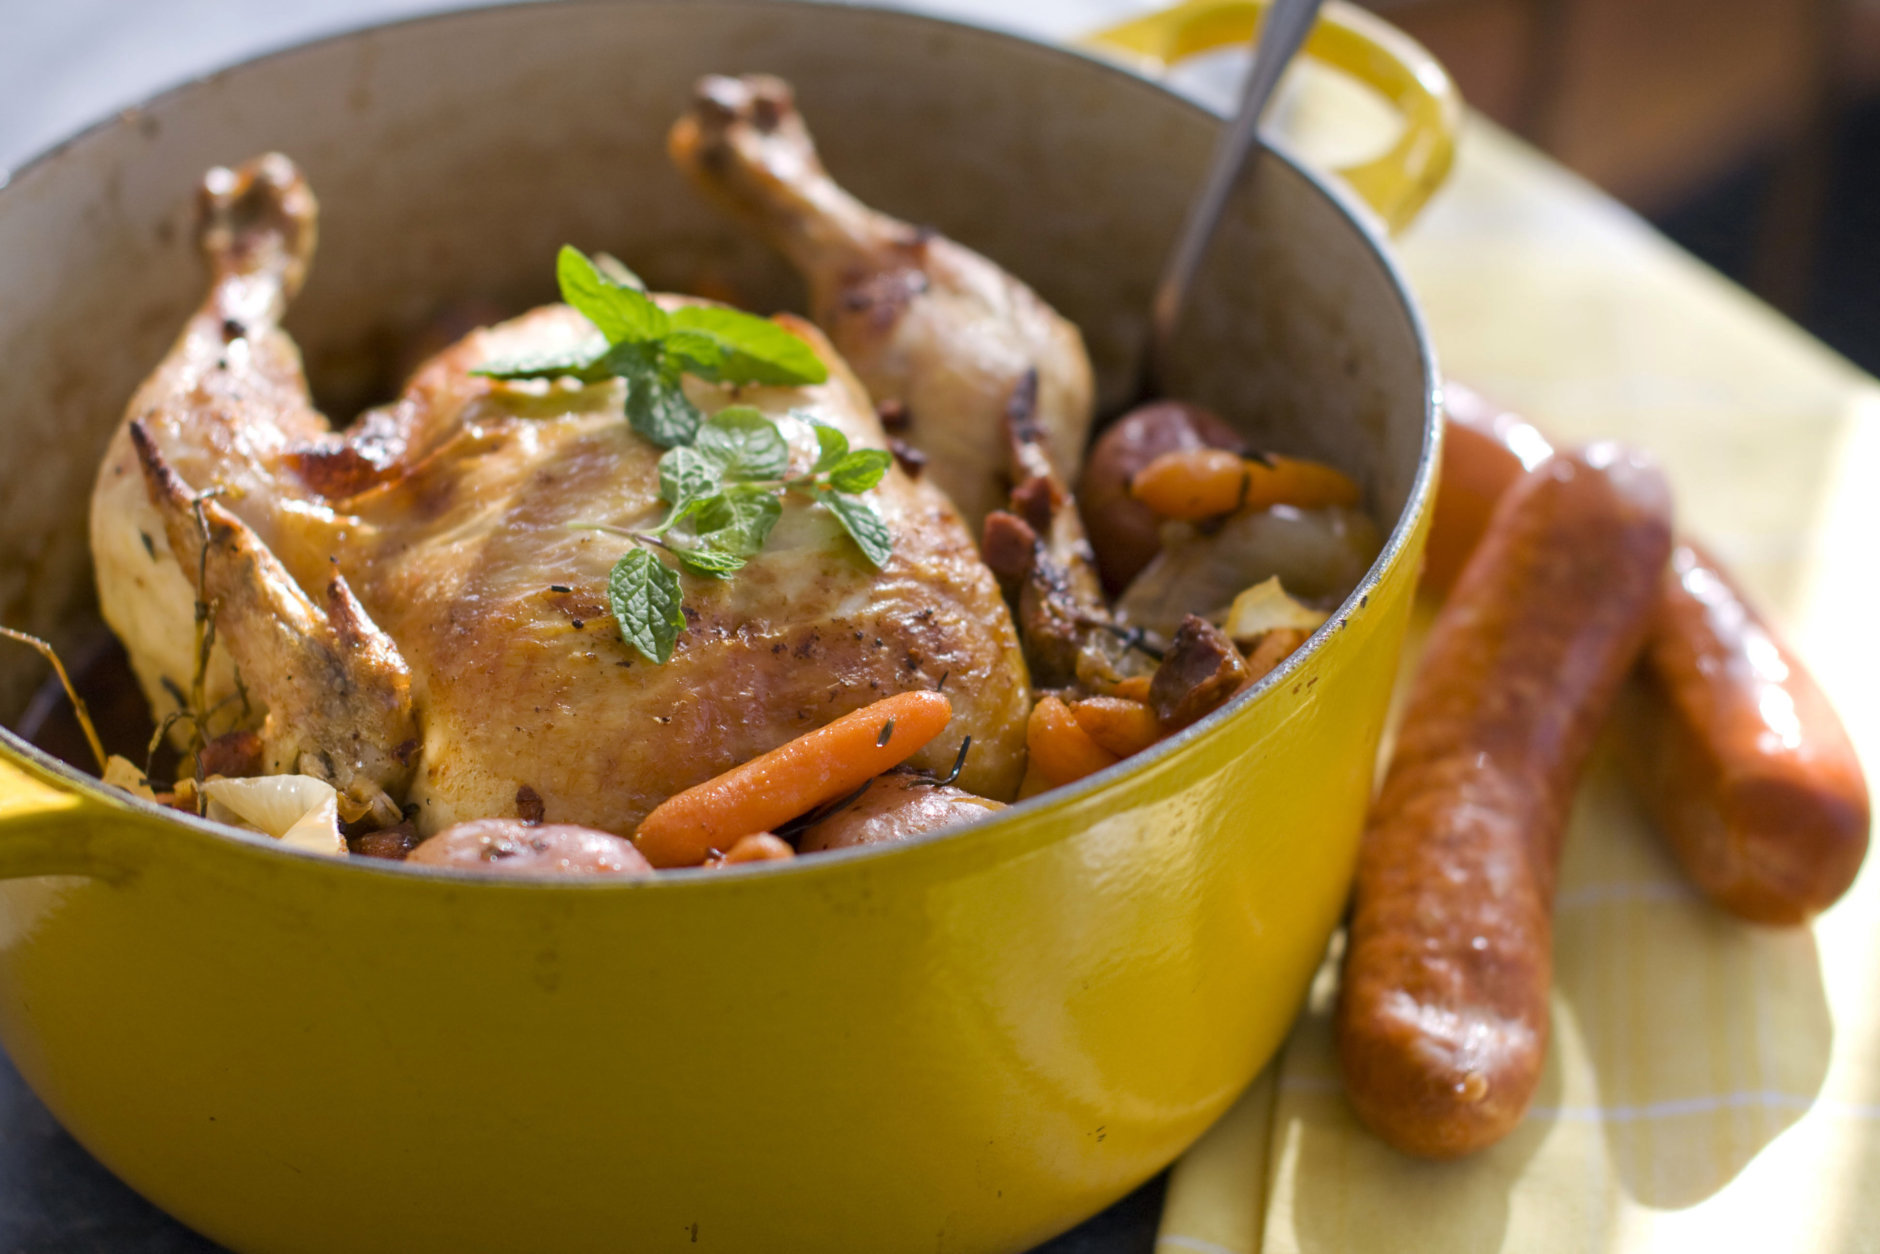 In this image taken on Jan. 24, 2012, a roasted chicken with chorizo and root vegetables is shown in Concord, N.H. (AP Photo/Matthew Mead)